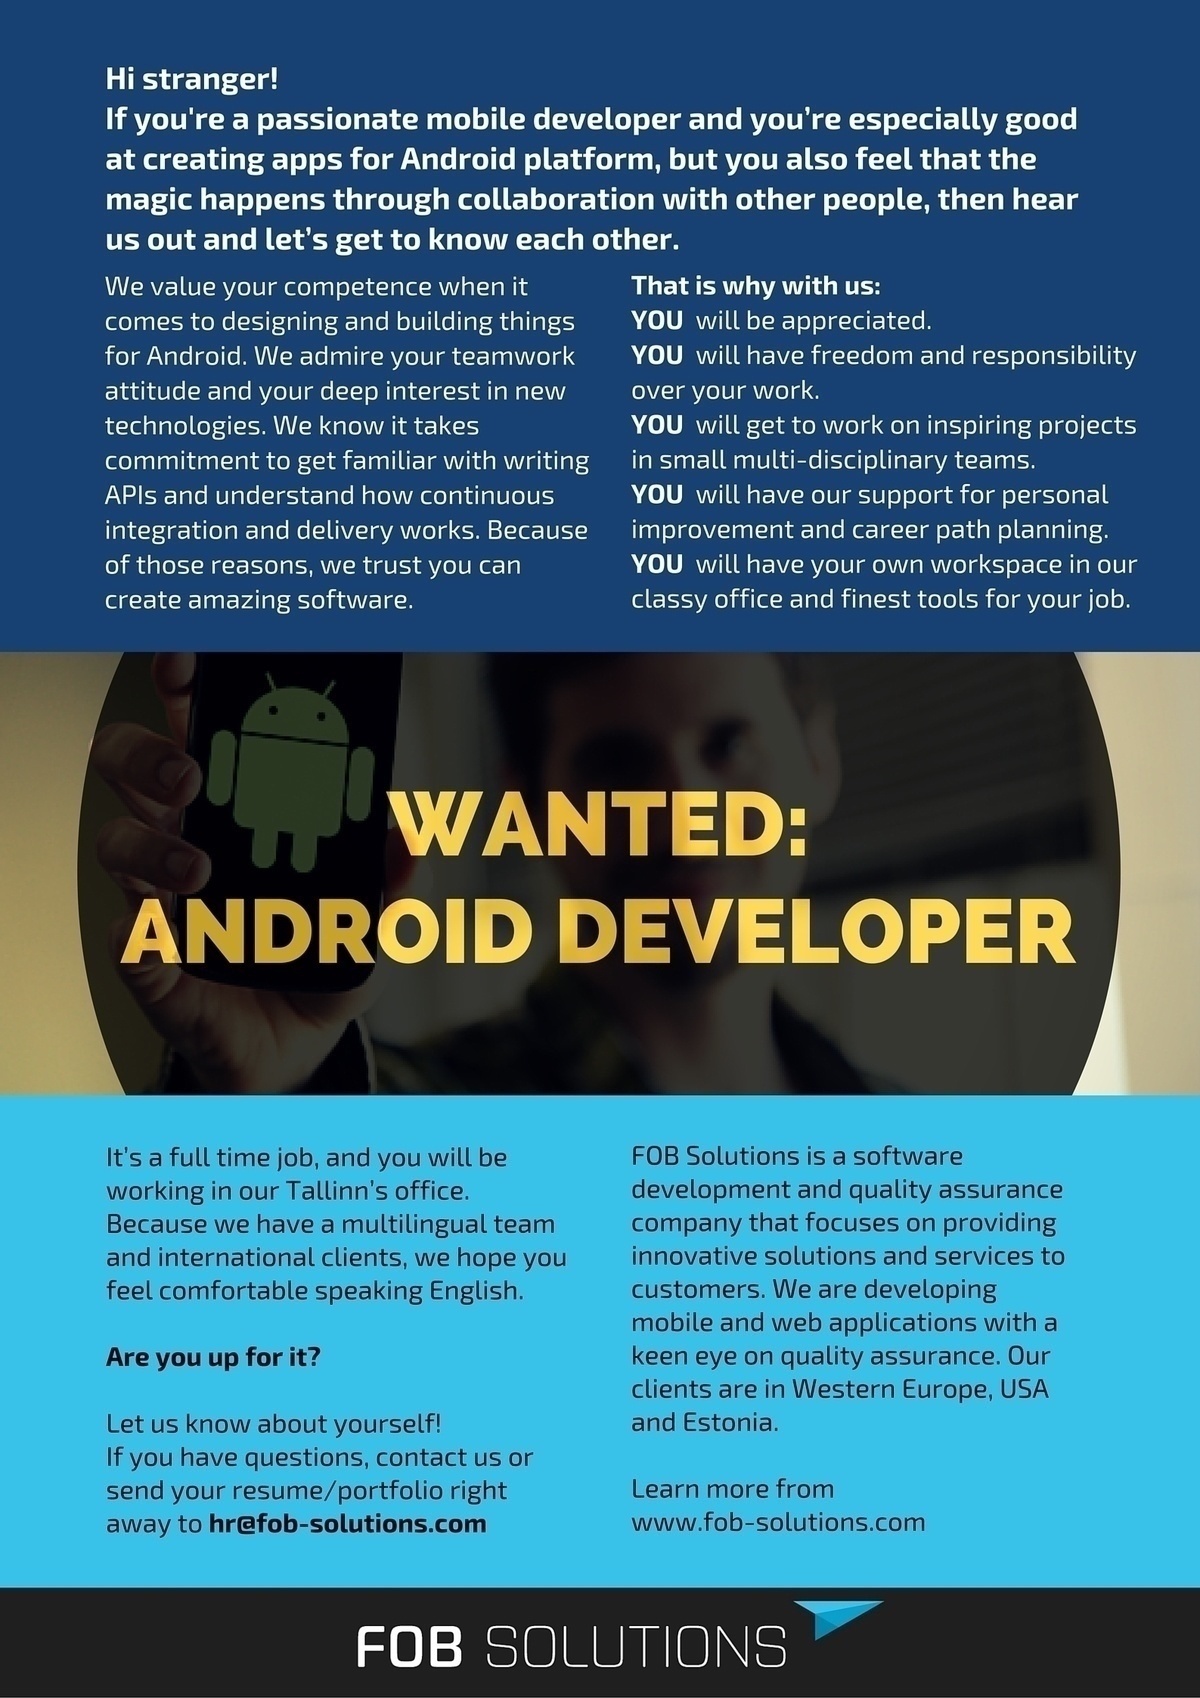 FOB Solutions OÜ Wanted: ANDROID DEVELOPER